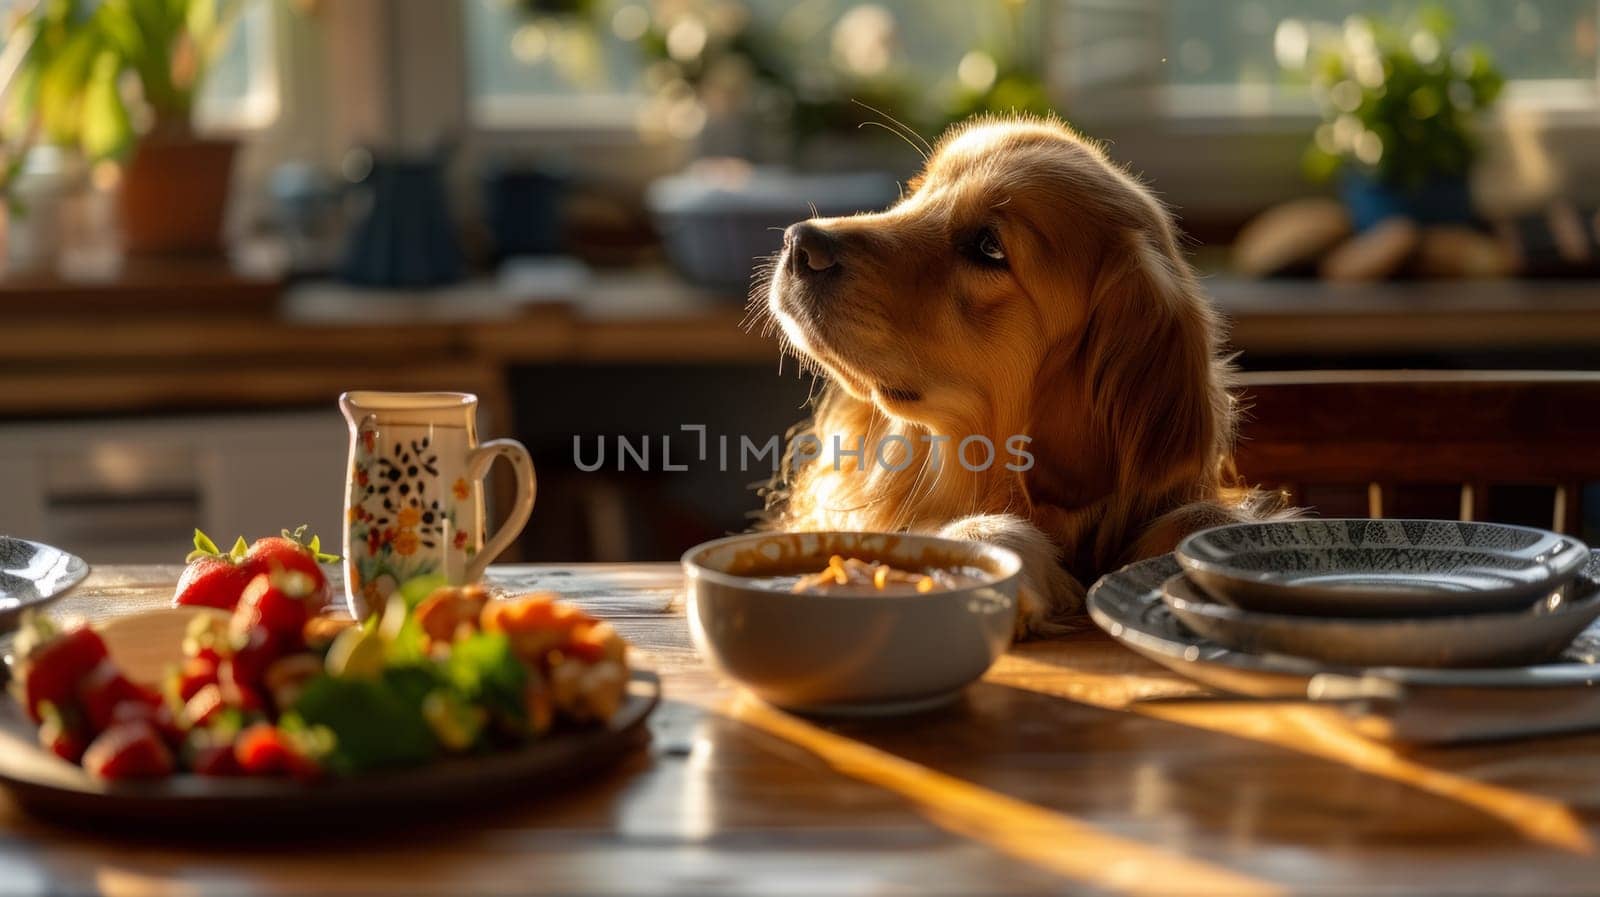 A dog sitting at a table with food and drink on it, AI by starush